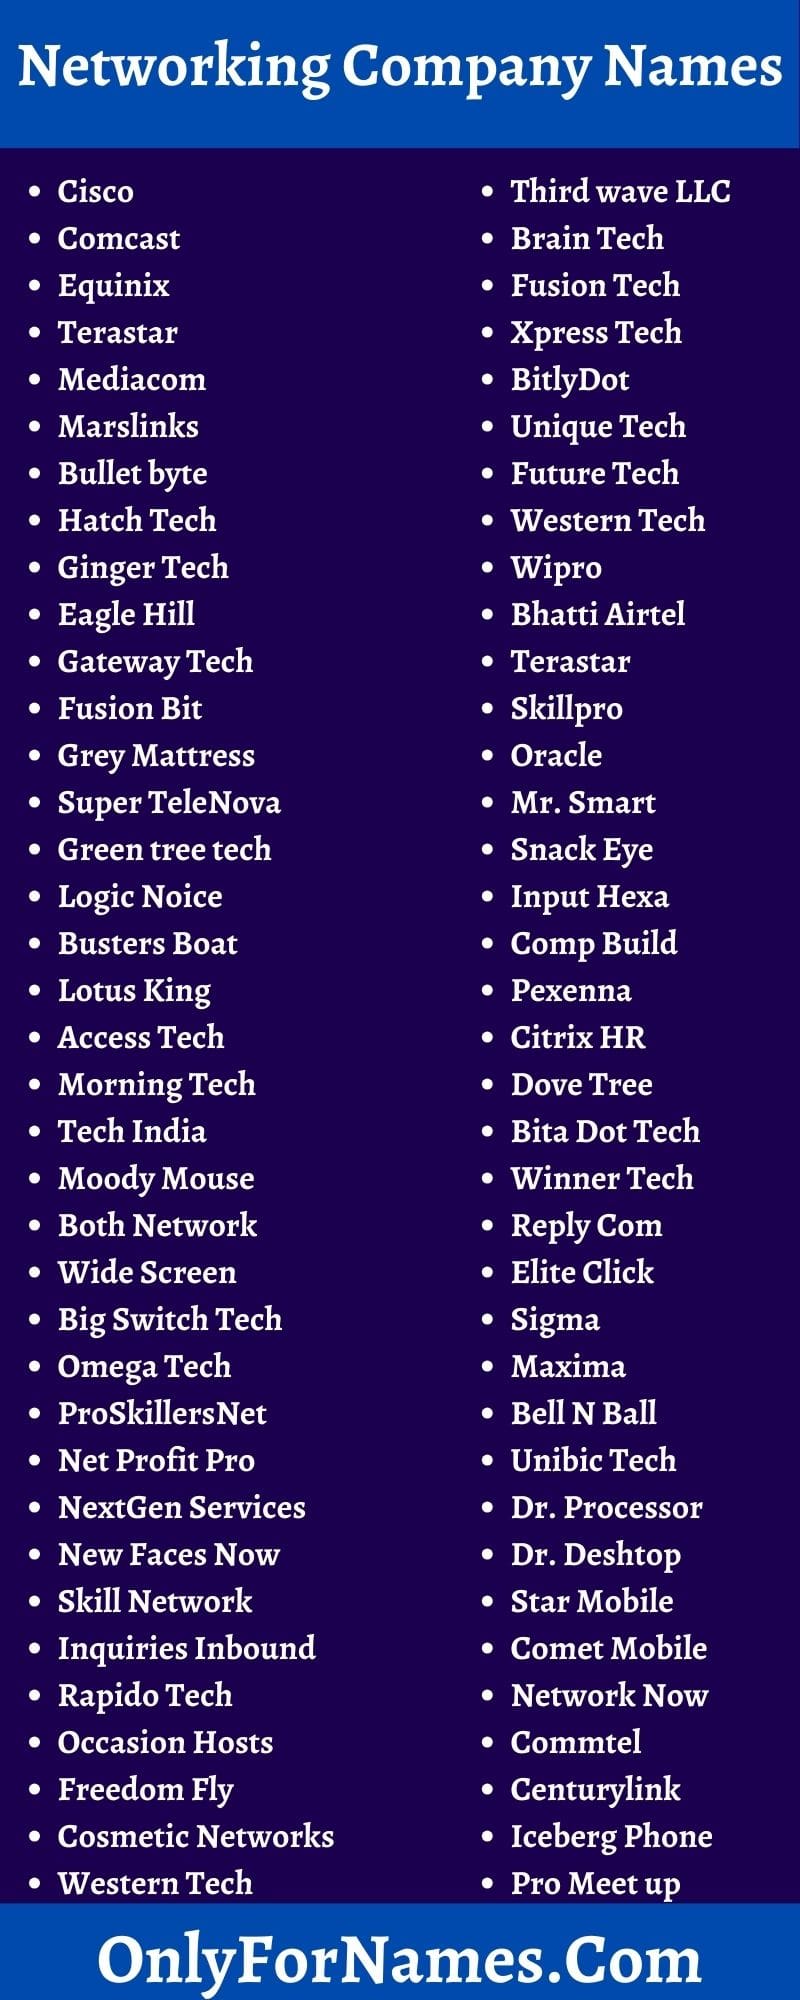 Networking Company Names